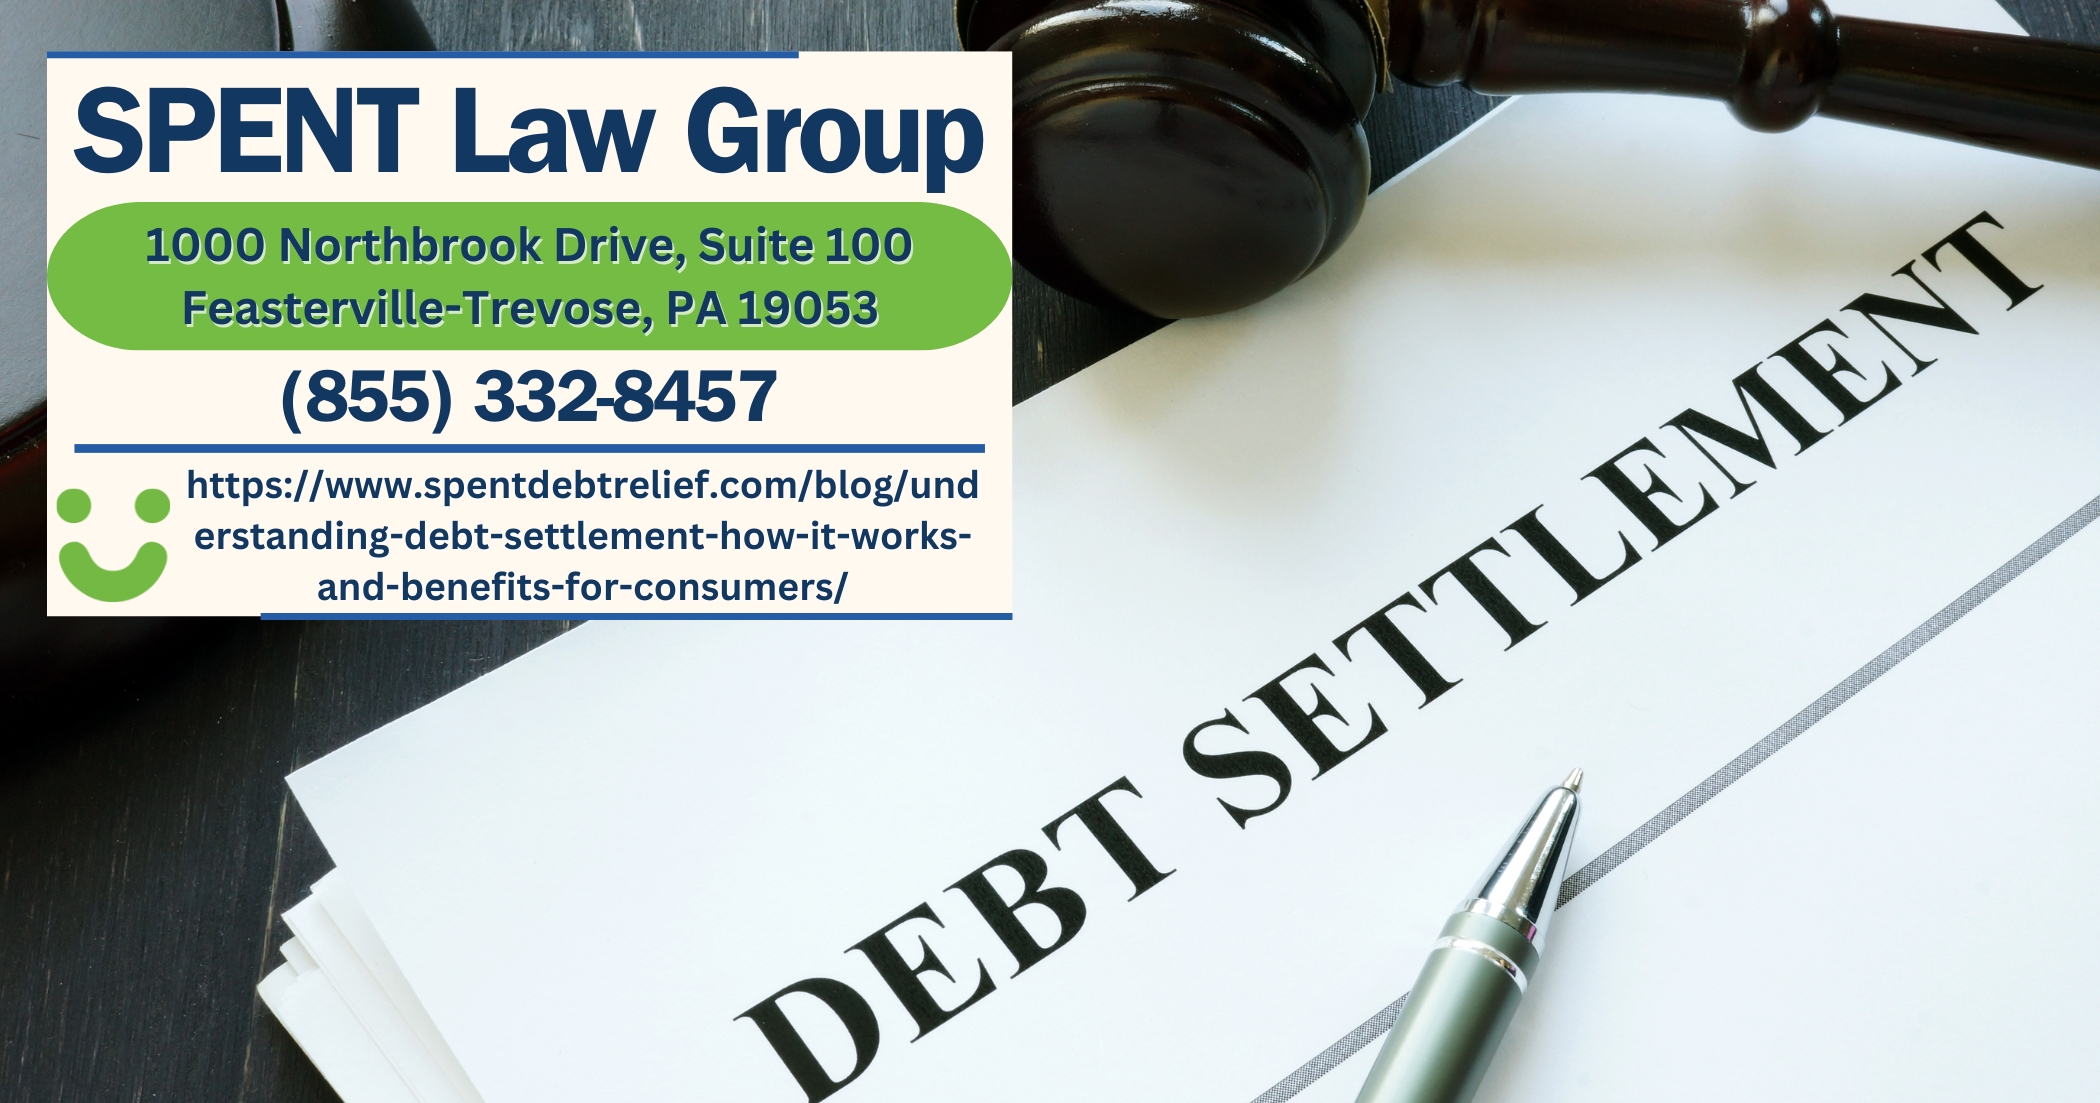 SPENT Law Group's Debt Settlement Attorneys Release Insightful Article on Consumer Debt Solutions